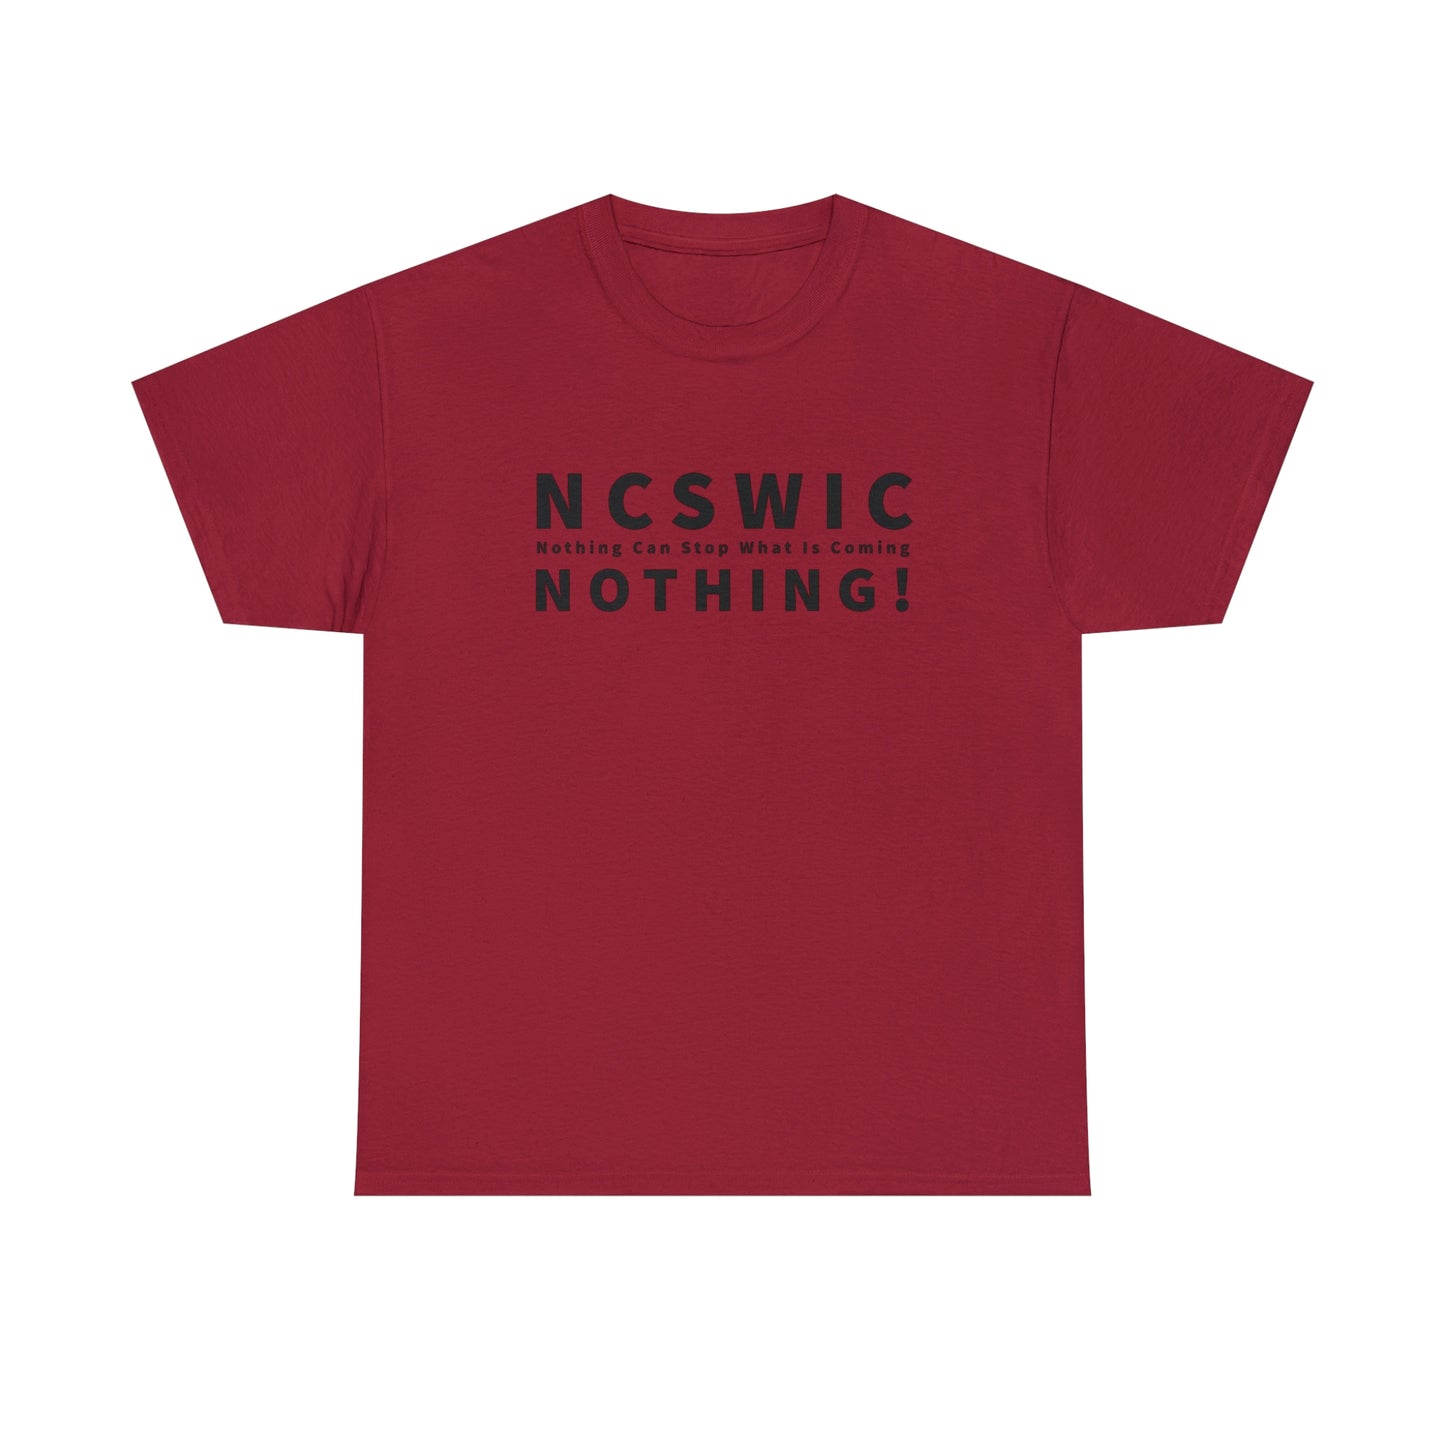 NCSWIC T-Shirt For Conspiracy T Shirt For Conservative Patriot Shirt Social Justice Awareness TShirt Nothing Can Stop What Is Coming TShirt